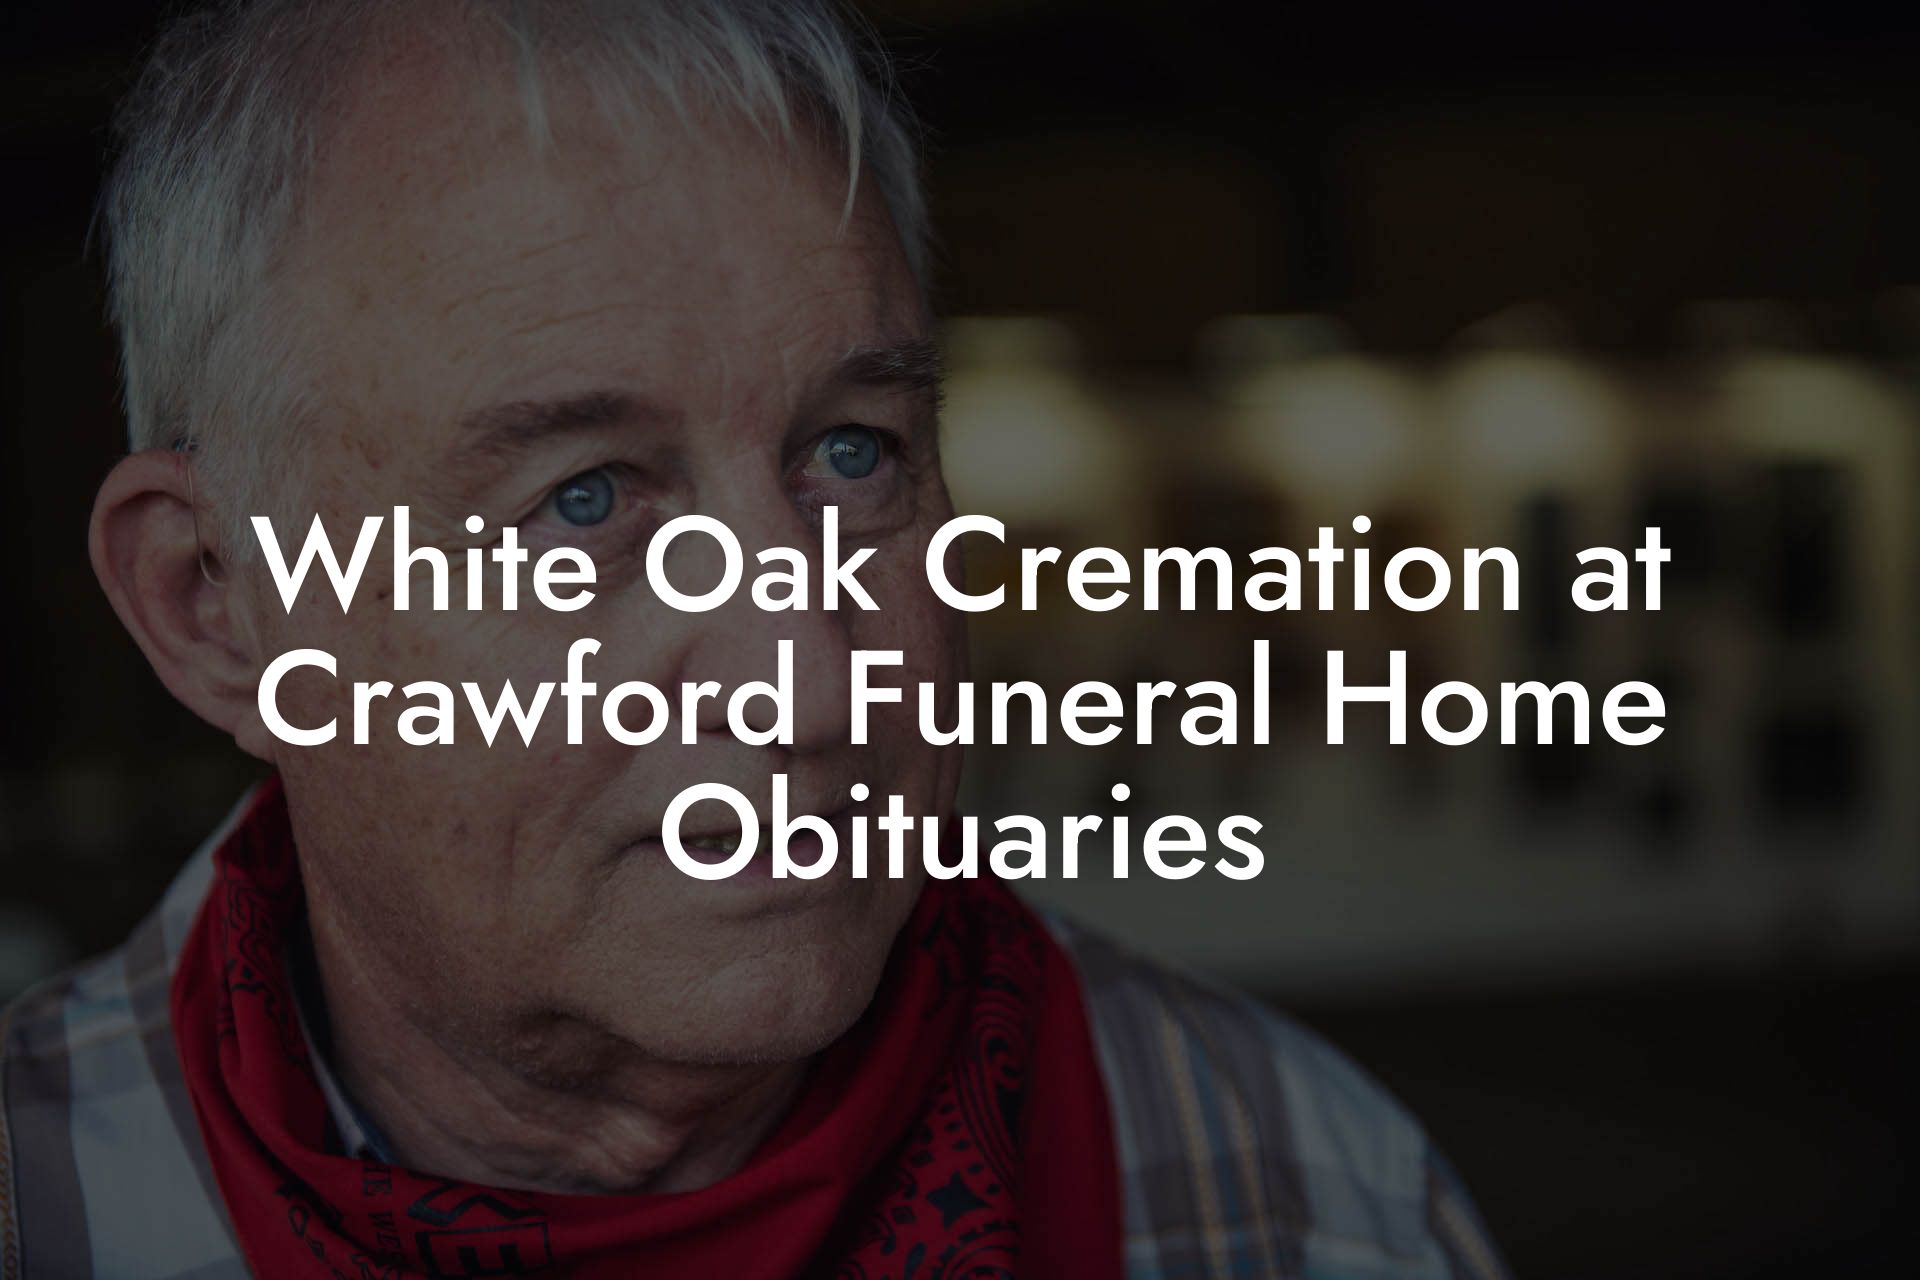 White Oak Cremation at Crawford Funeral Home Obituaries